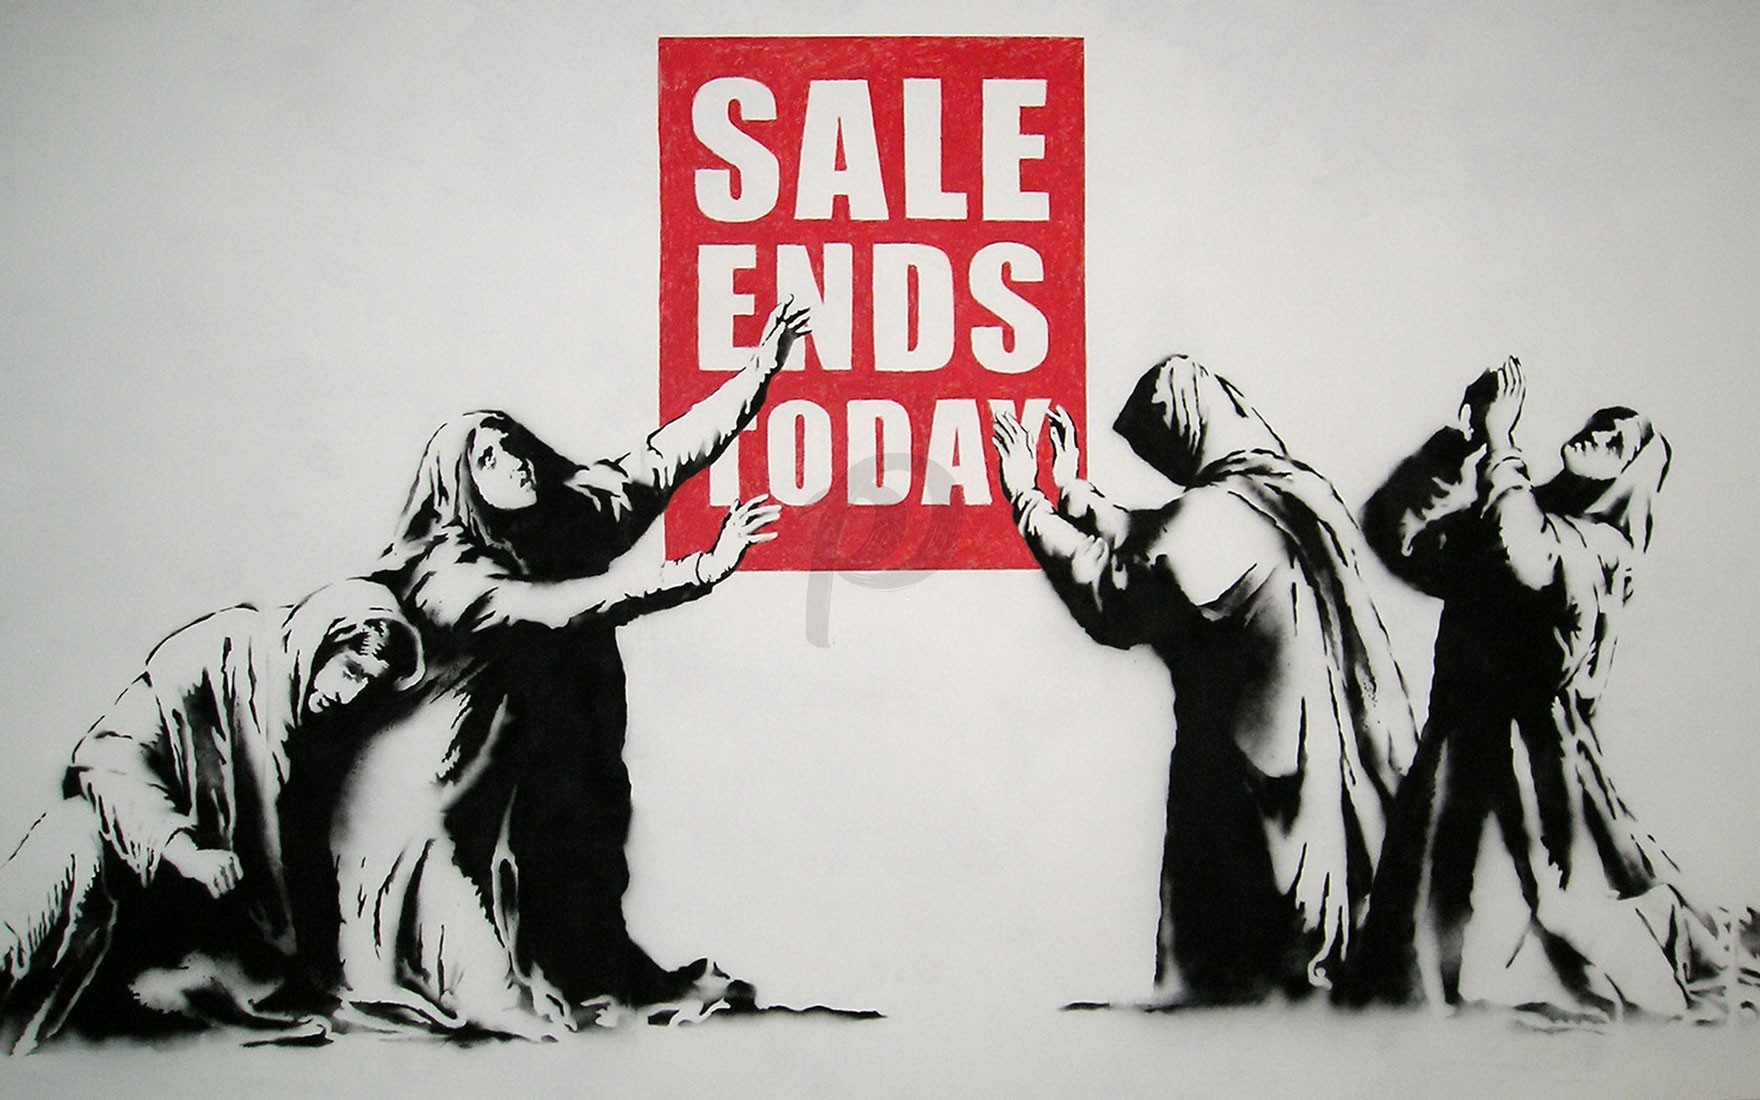 Banksy - Sale Ends Today (Hand-Painted Reproduction)